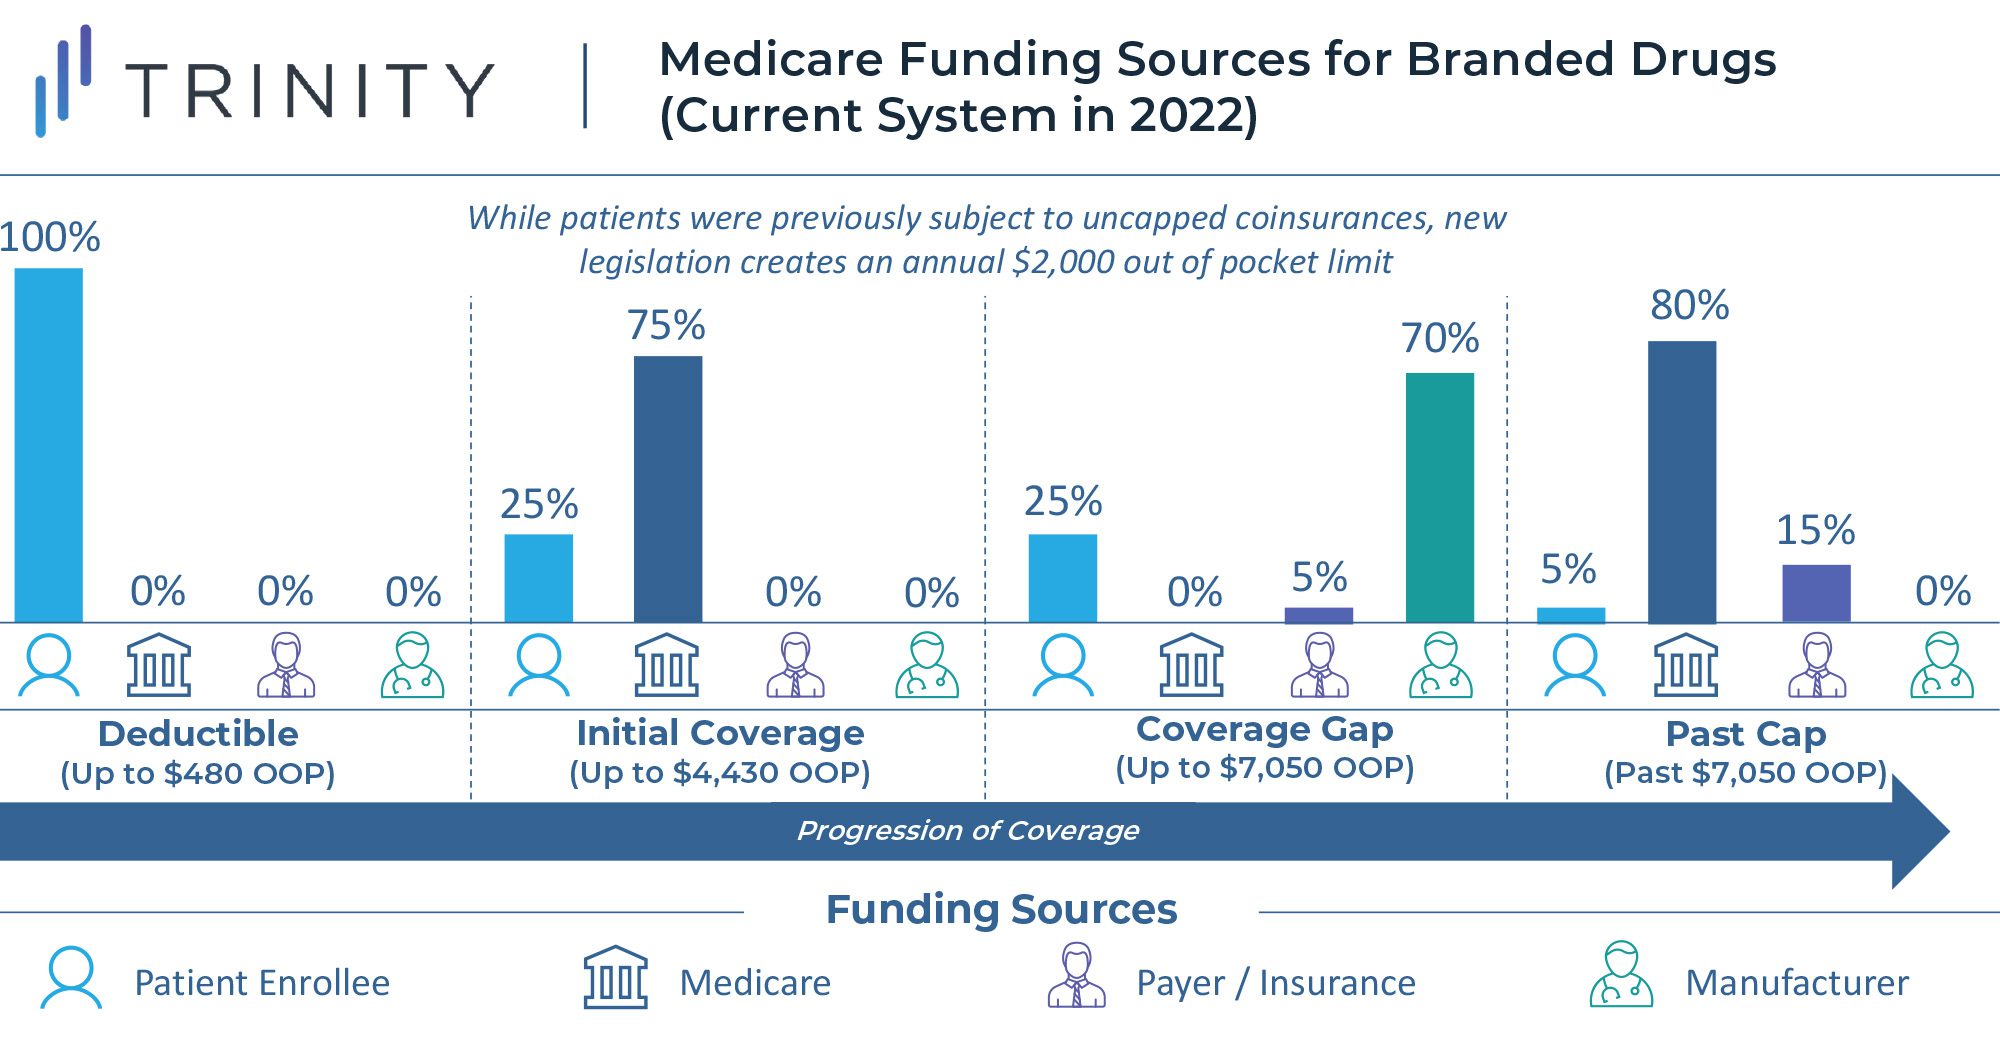 Medicare Funding Sources for Branded Drugs (Current System in 2022)